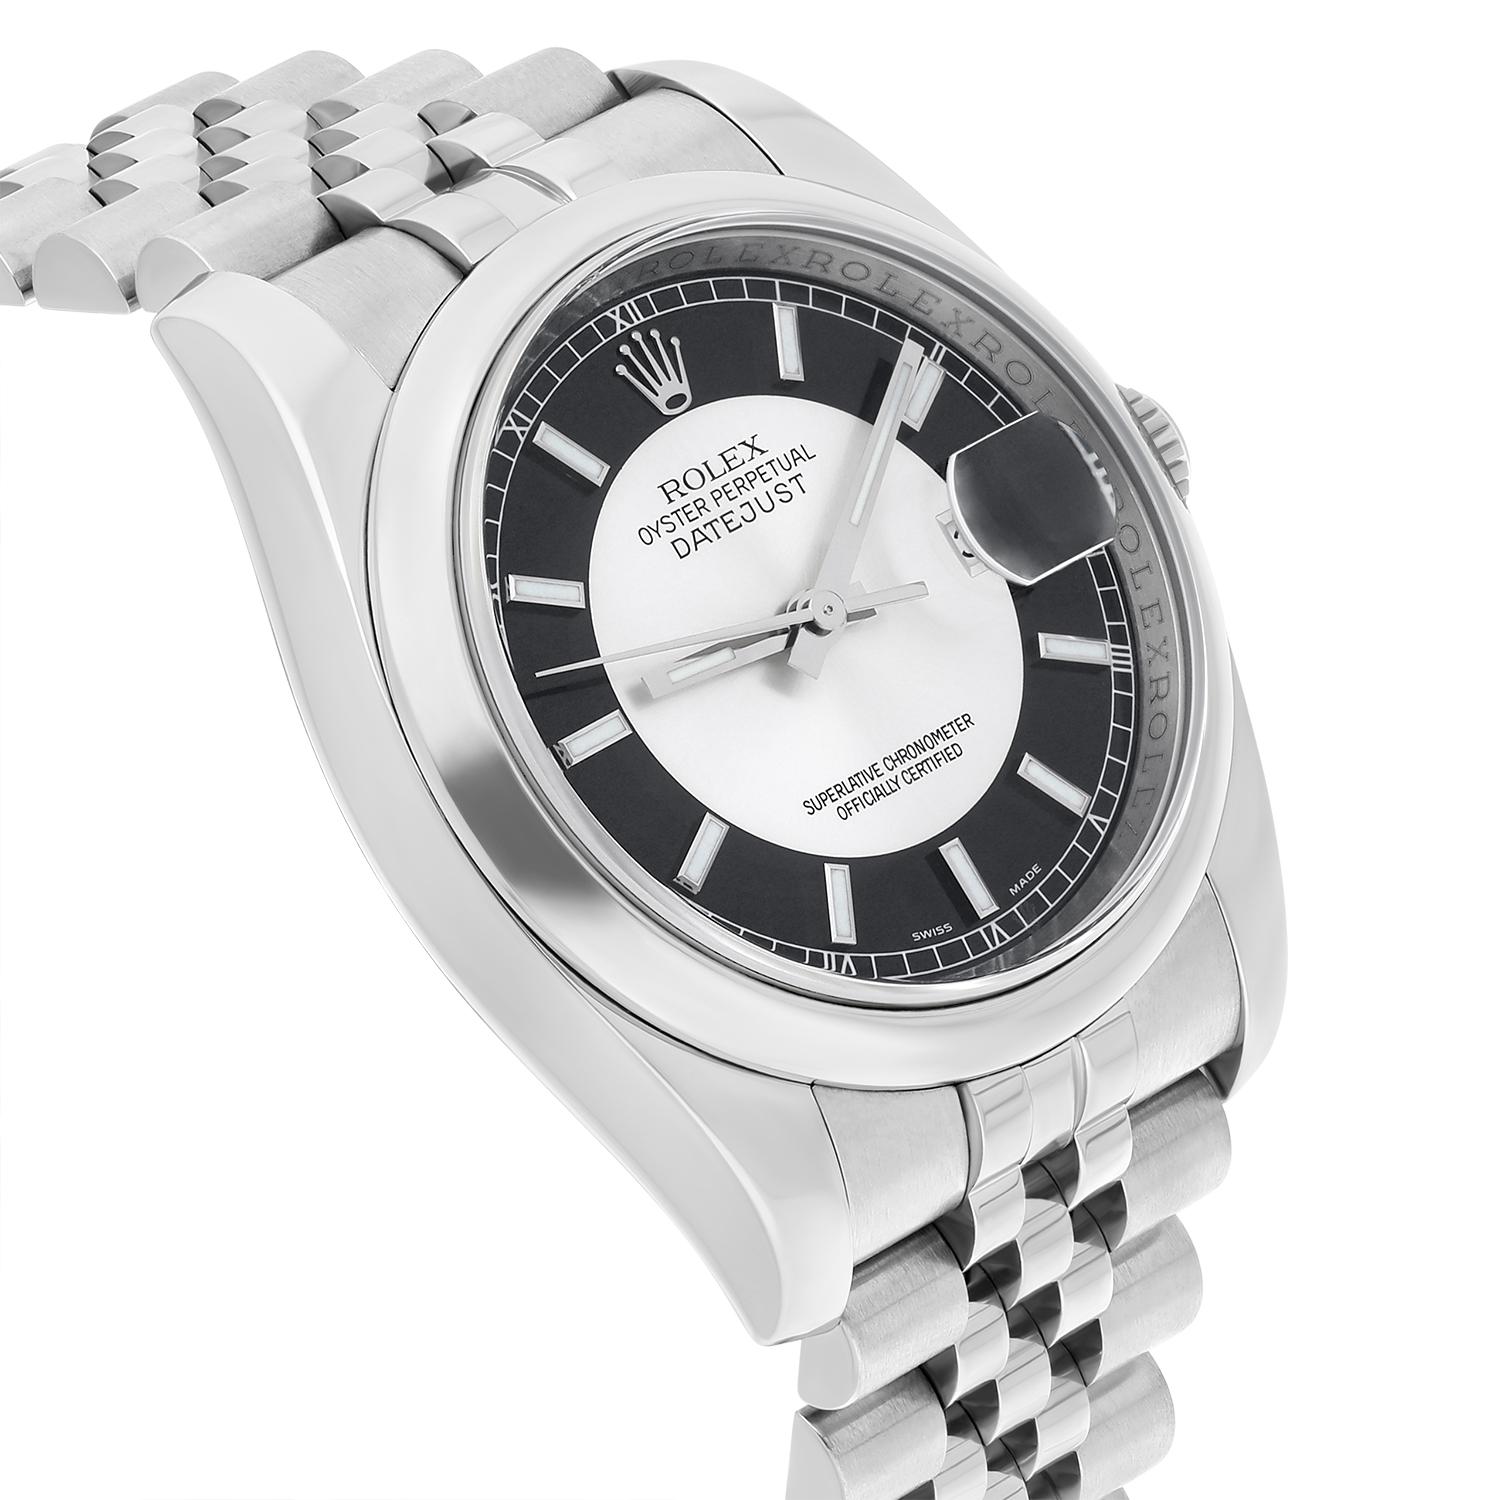 Rolex Datejust 36mm Tuxedo Dial Stainless Steel Jubilee 116234 Unisex Watch In Excellent Condition For Sale In New York, NY